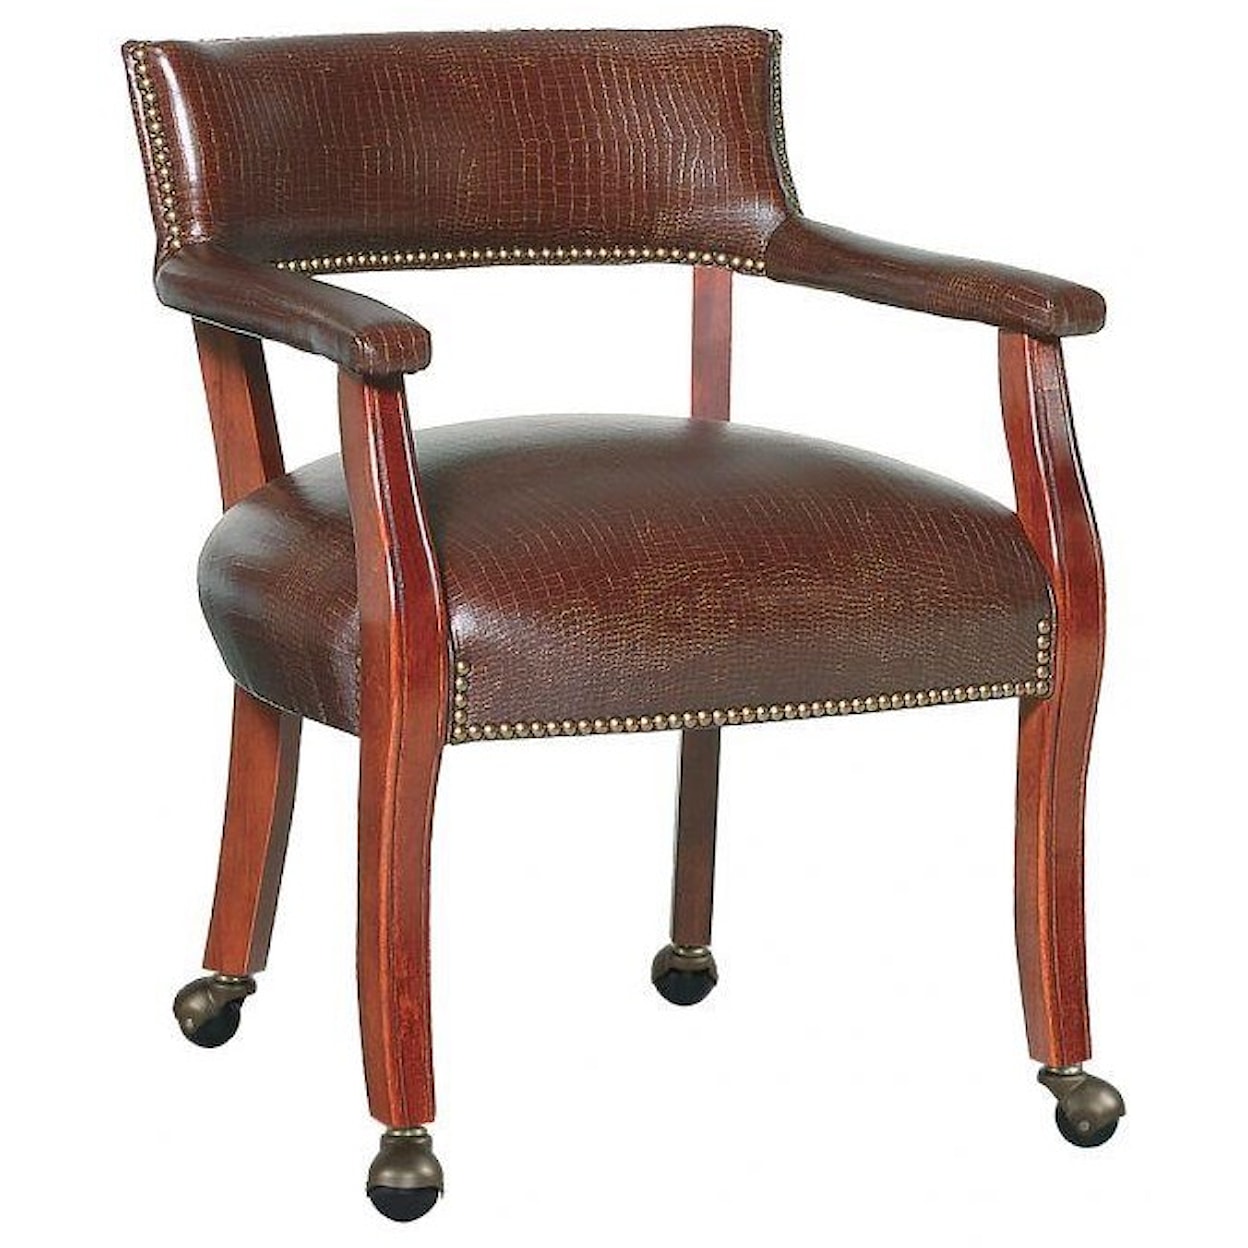 Fairfield Chairs Thayer Occasional Chair with Casters